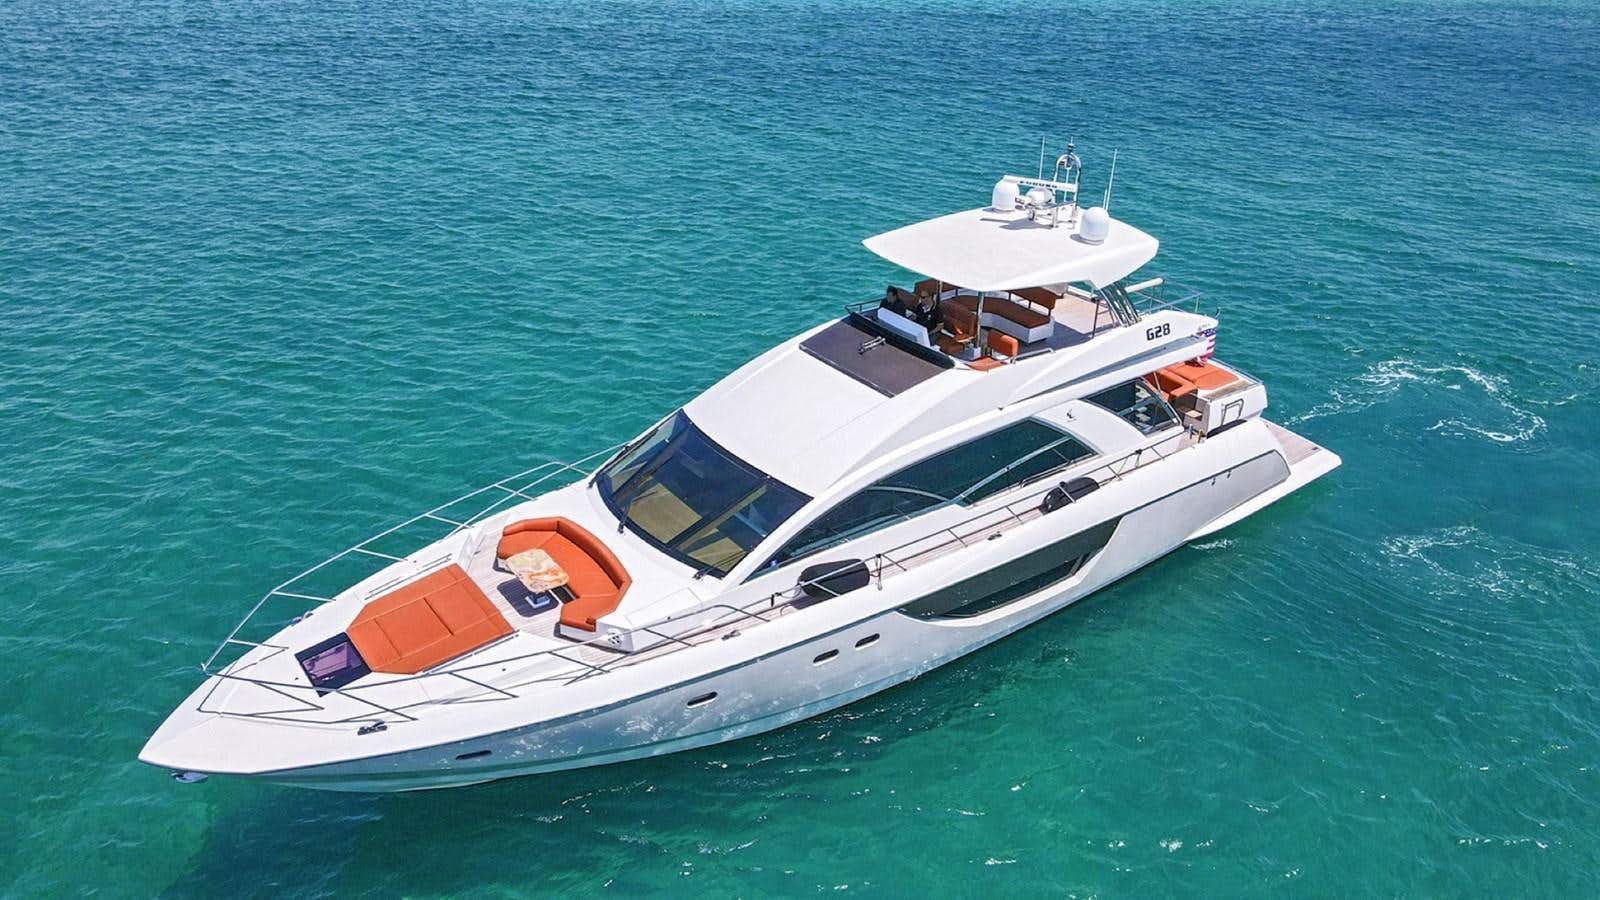 Knot guilty
Yacht for Sale